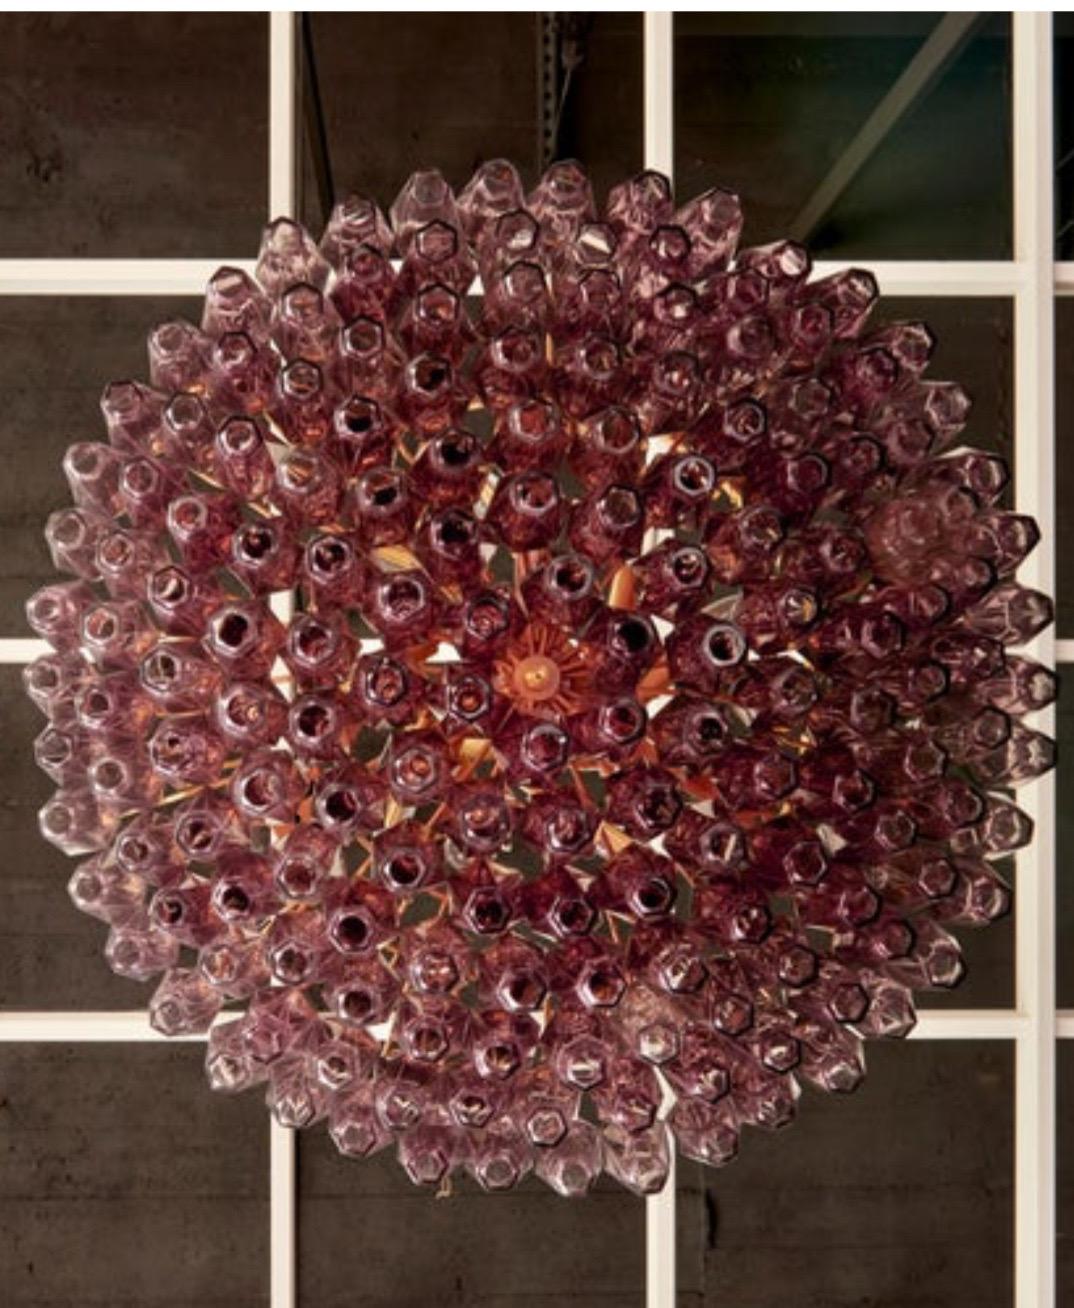 Very huge handblown amethyst Murano glass poliedri or polyhedral chandelier in the manner of Carlo Scarpa for Venini. The chandelier has a impressive size and is in very good condition. 

To be on the safe side, the lamp should be checked locally by